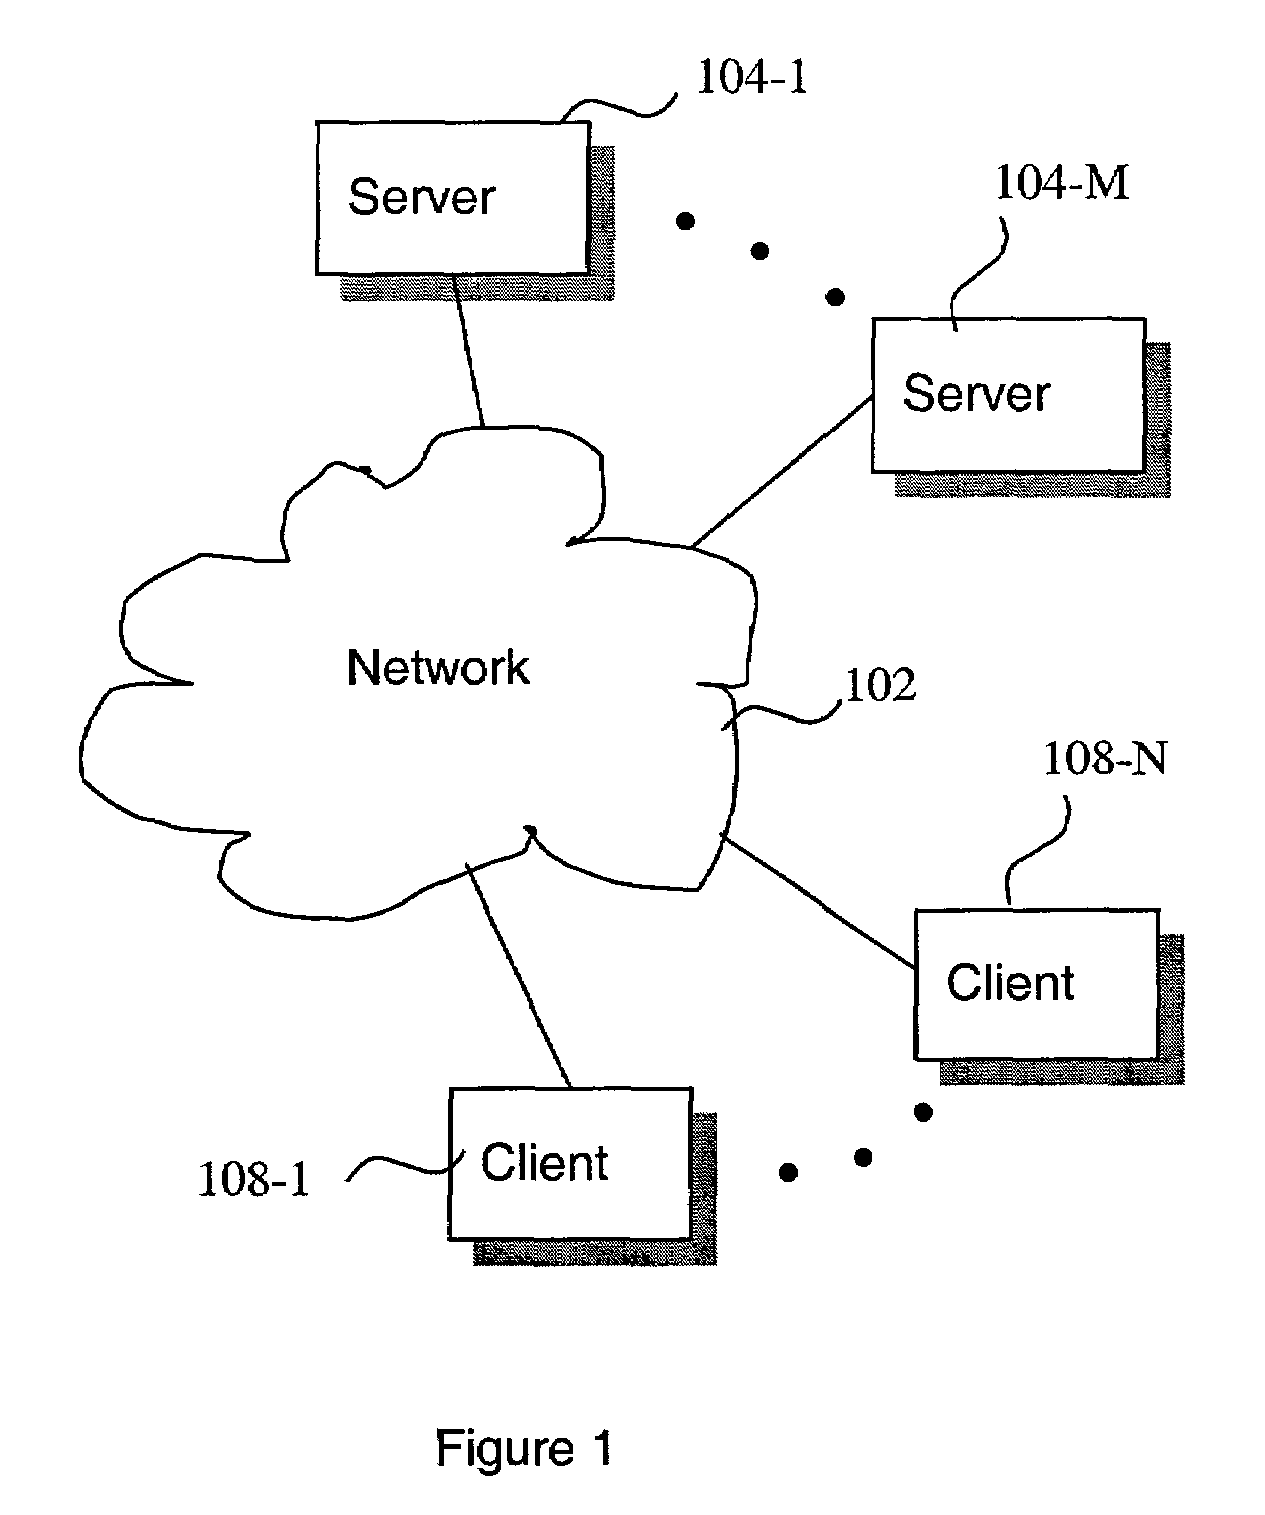 Method and apparatus facilitating direct access to a parallel ATA device by an autonomous subsystem